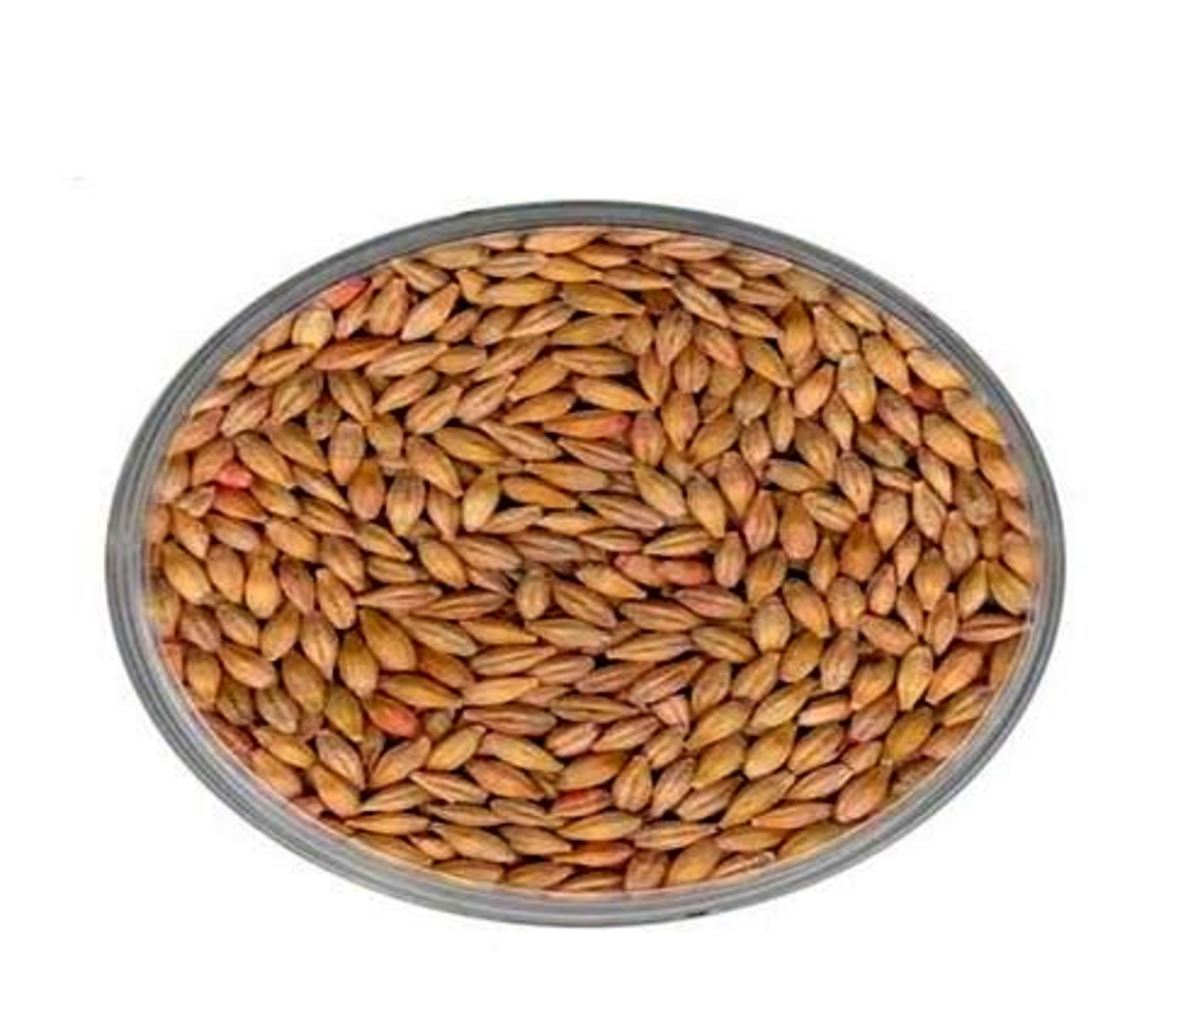 This article will provide you with all you need to know about the wonderful grain known as barley.